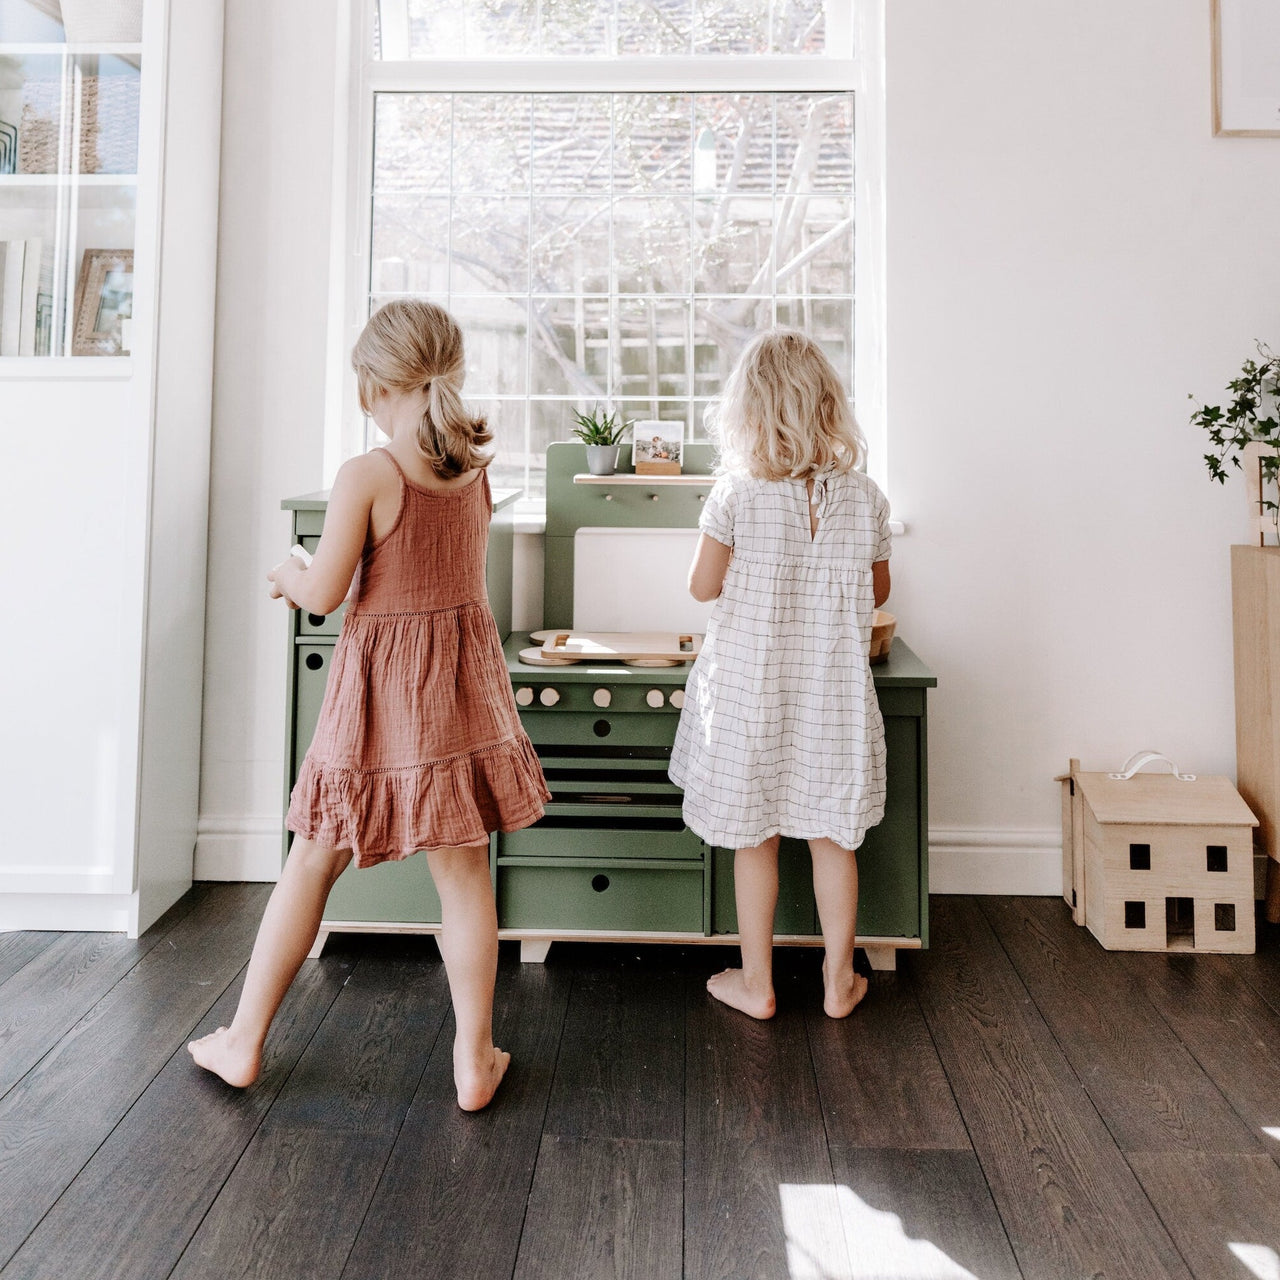 Dusty Green Wooden Play Kitchen - MIDMINI - Handcrafted wooden toys for generations.